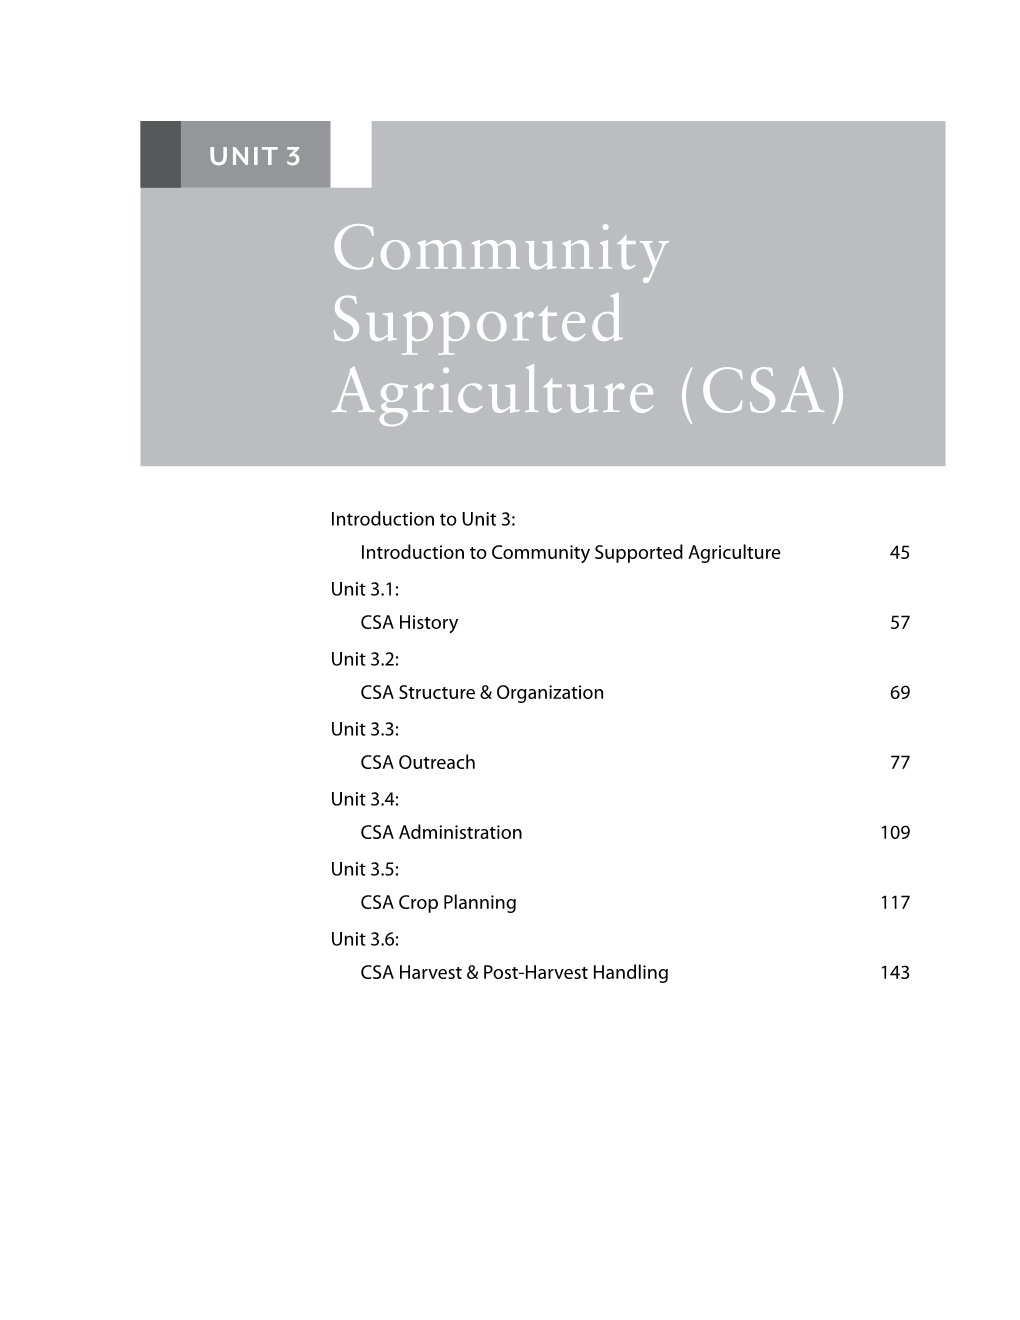 Unit 3.0 Community Supported Agriculture (CSA)